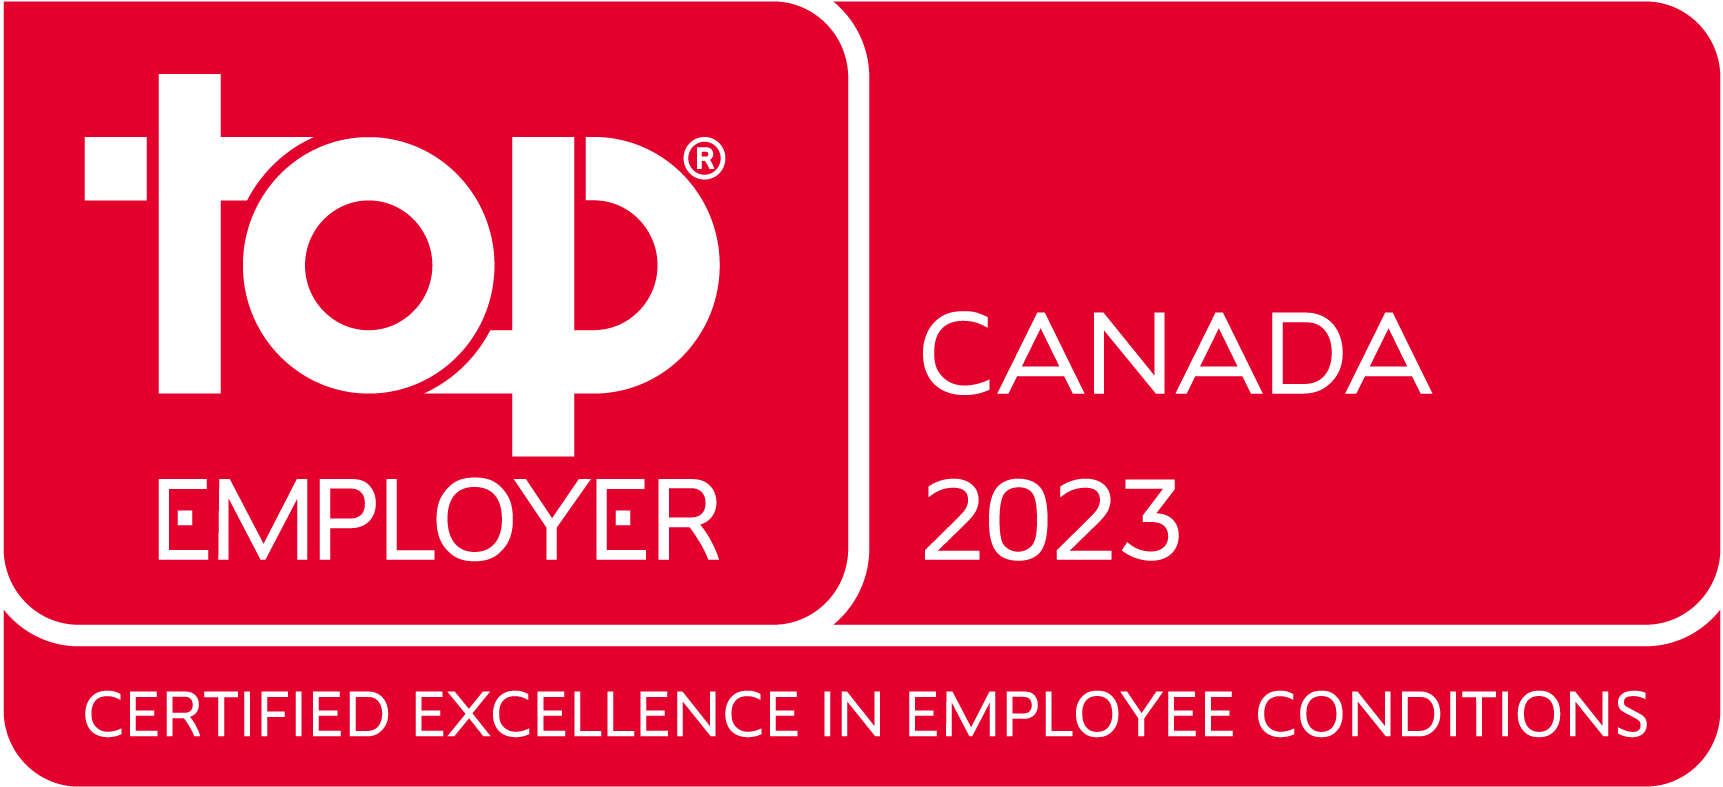 Top Employer 2023 in Canada